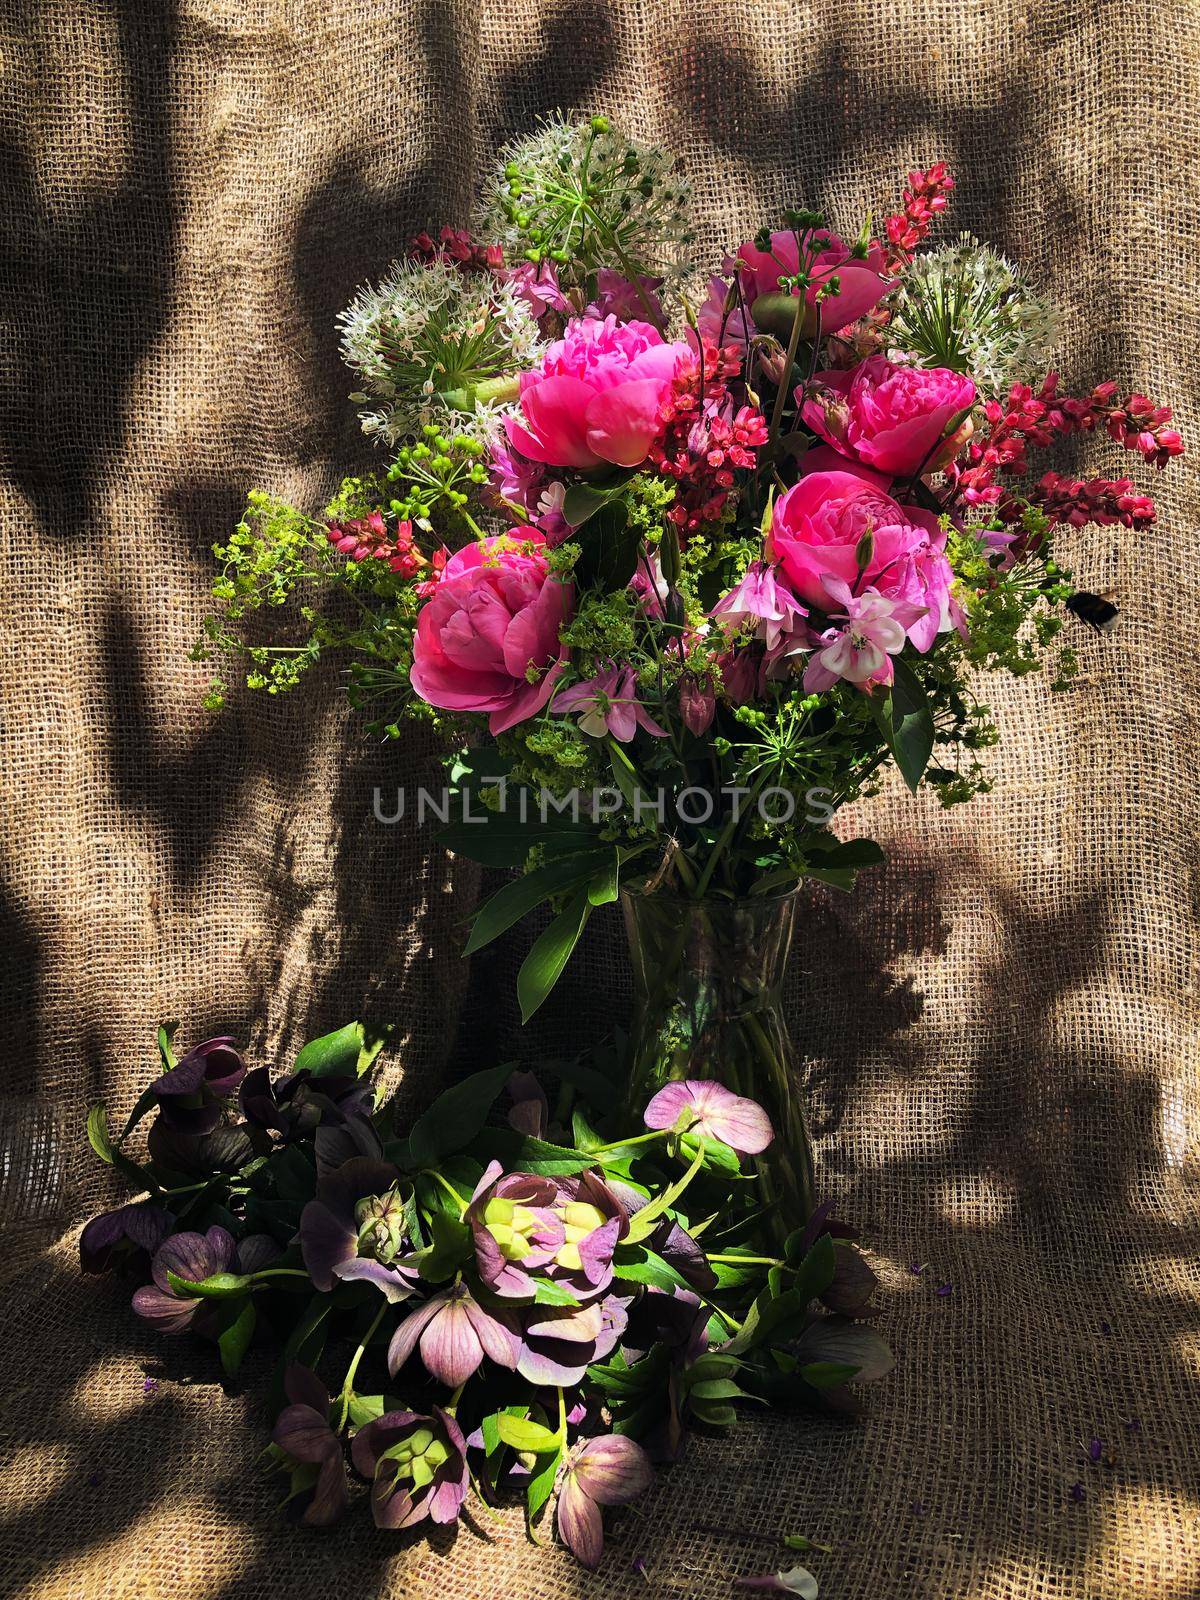 Romantic bouquets of flowers. Home decor and flowers arranging. Bouquet with peonies carnation bouquet, aliums, aquilegia, cuff and geyhera.